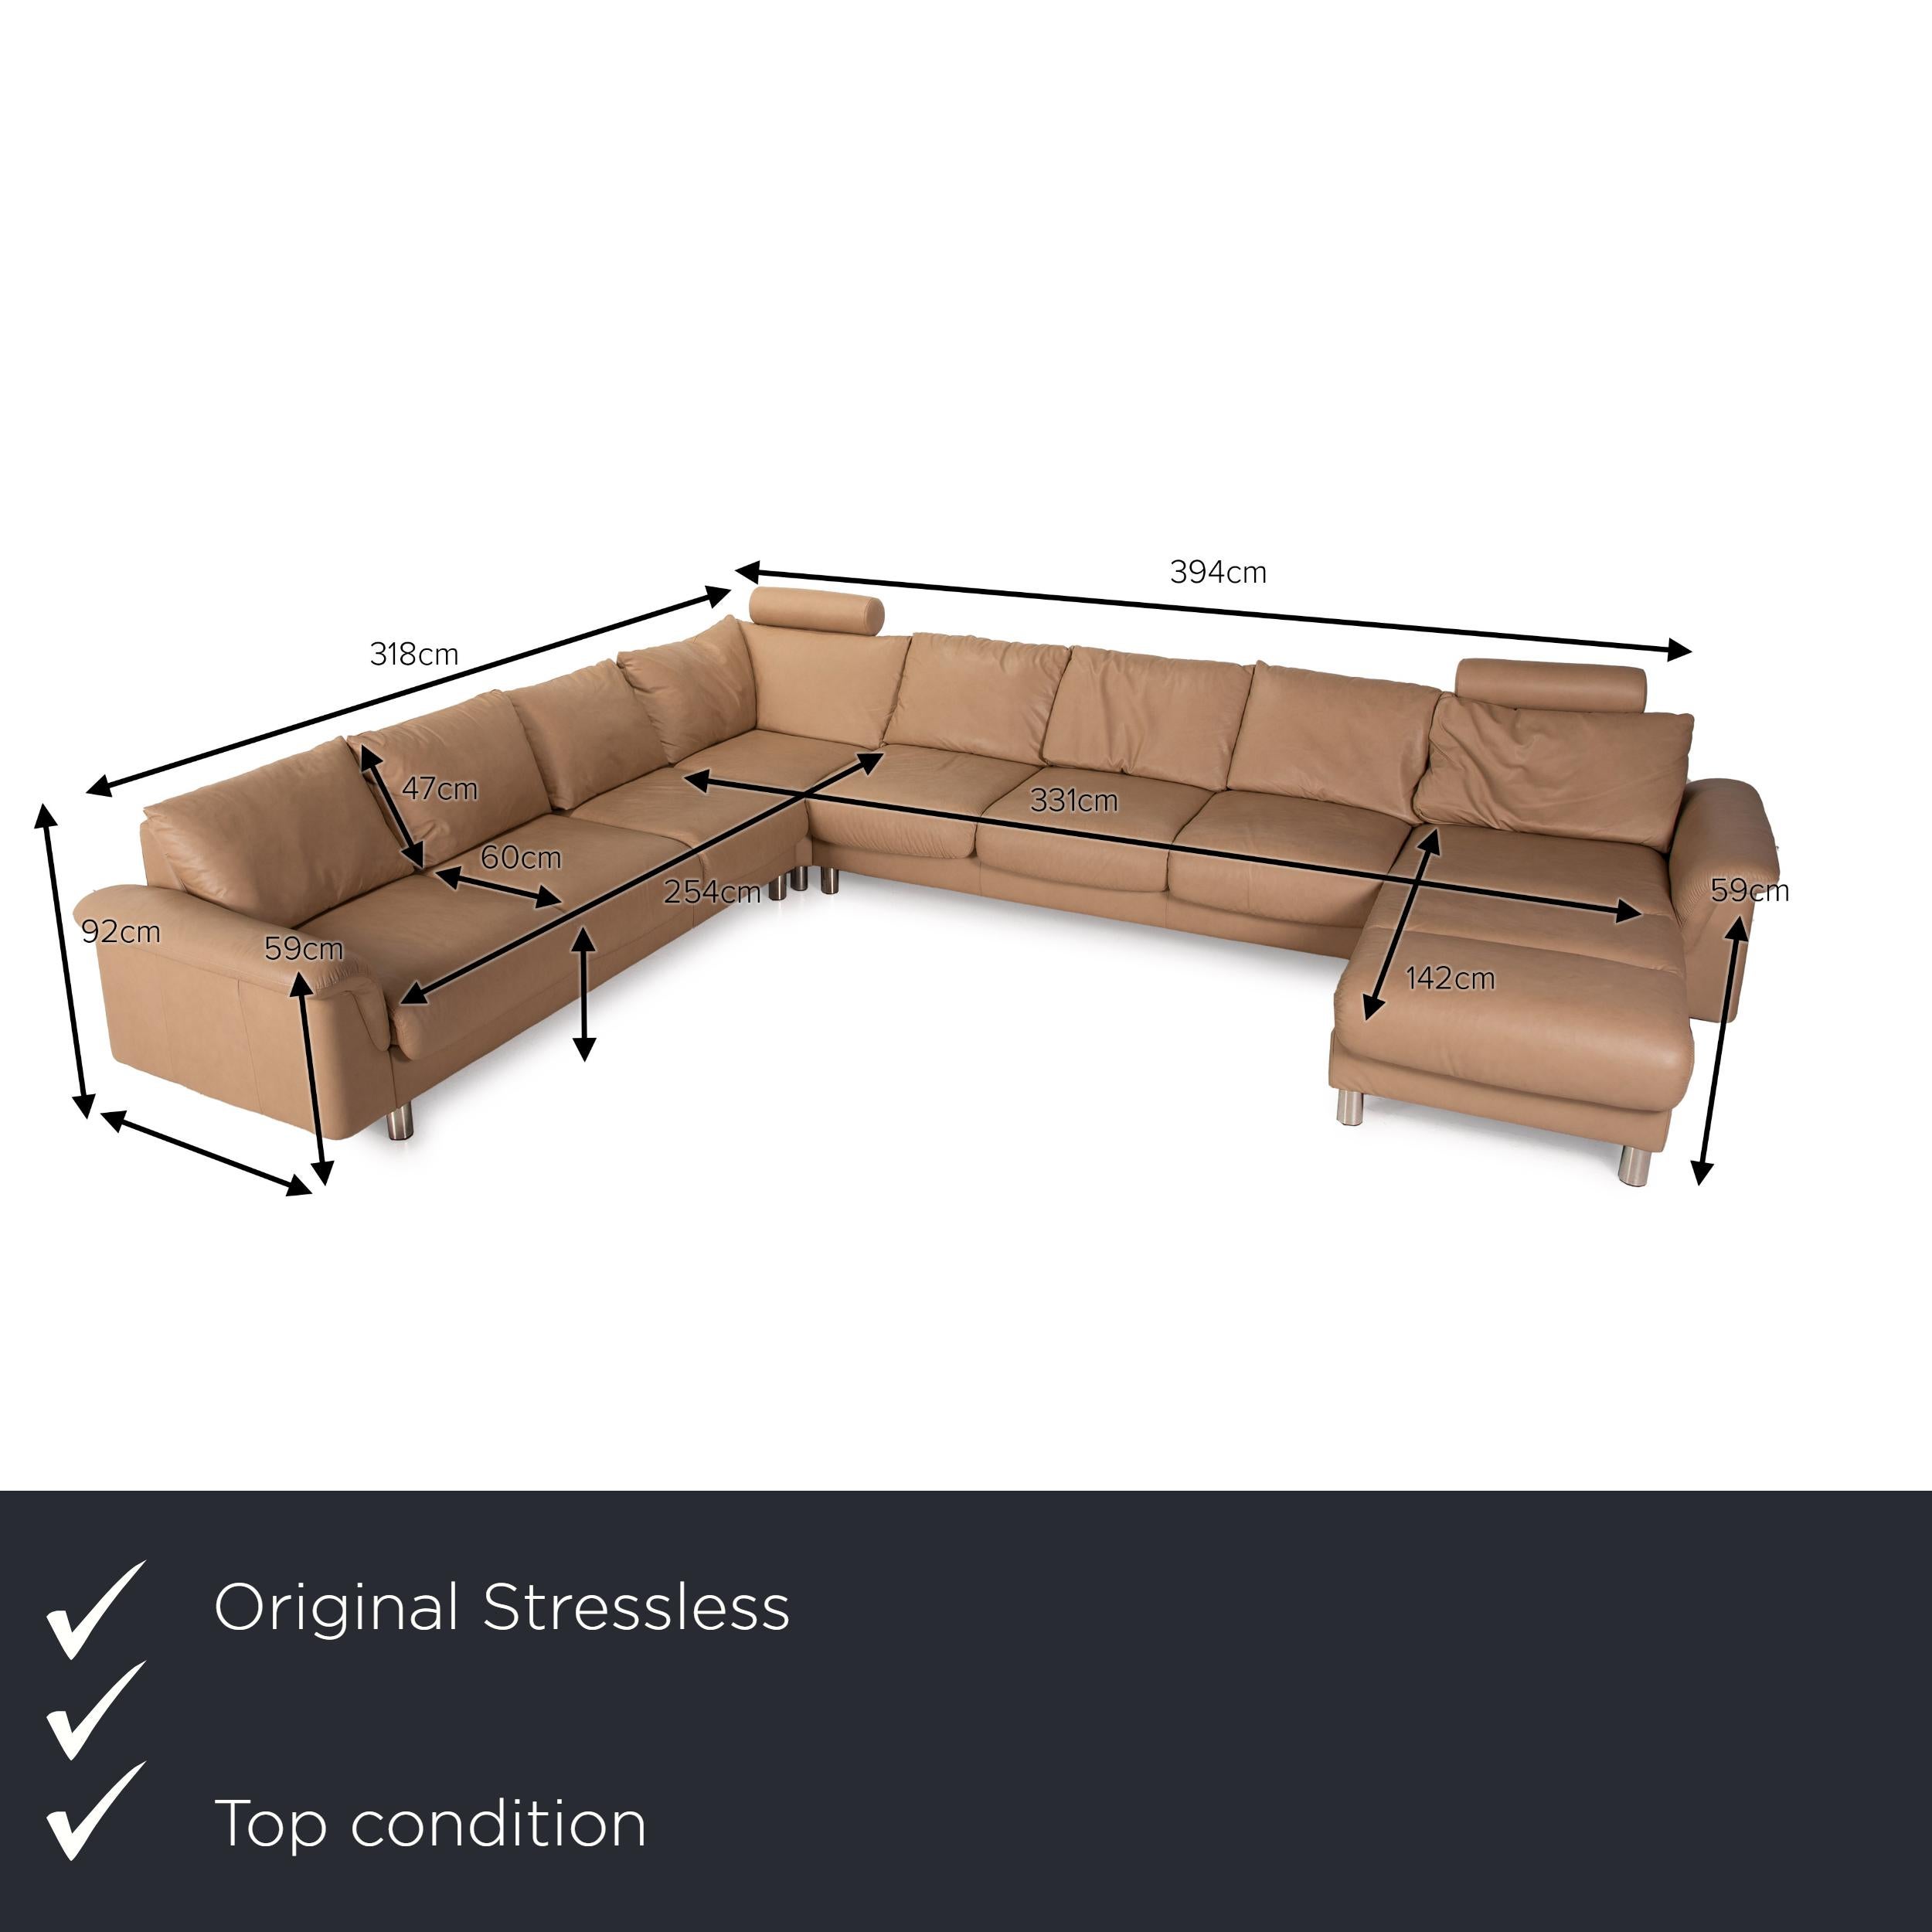 We present to you a Stressless E300 Leather Sofa Beige Corner Sofa Cream Corner Sofa Couch U-Shape.
 SKU: #16969-c4
 

 Product measurements in centimeters:
 

 depth: 98
 width: 186
 height: 92
 seat height: 46
 rest height: 59
 seat